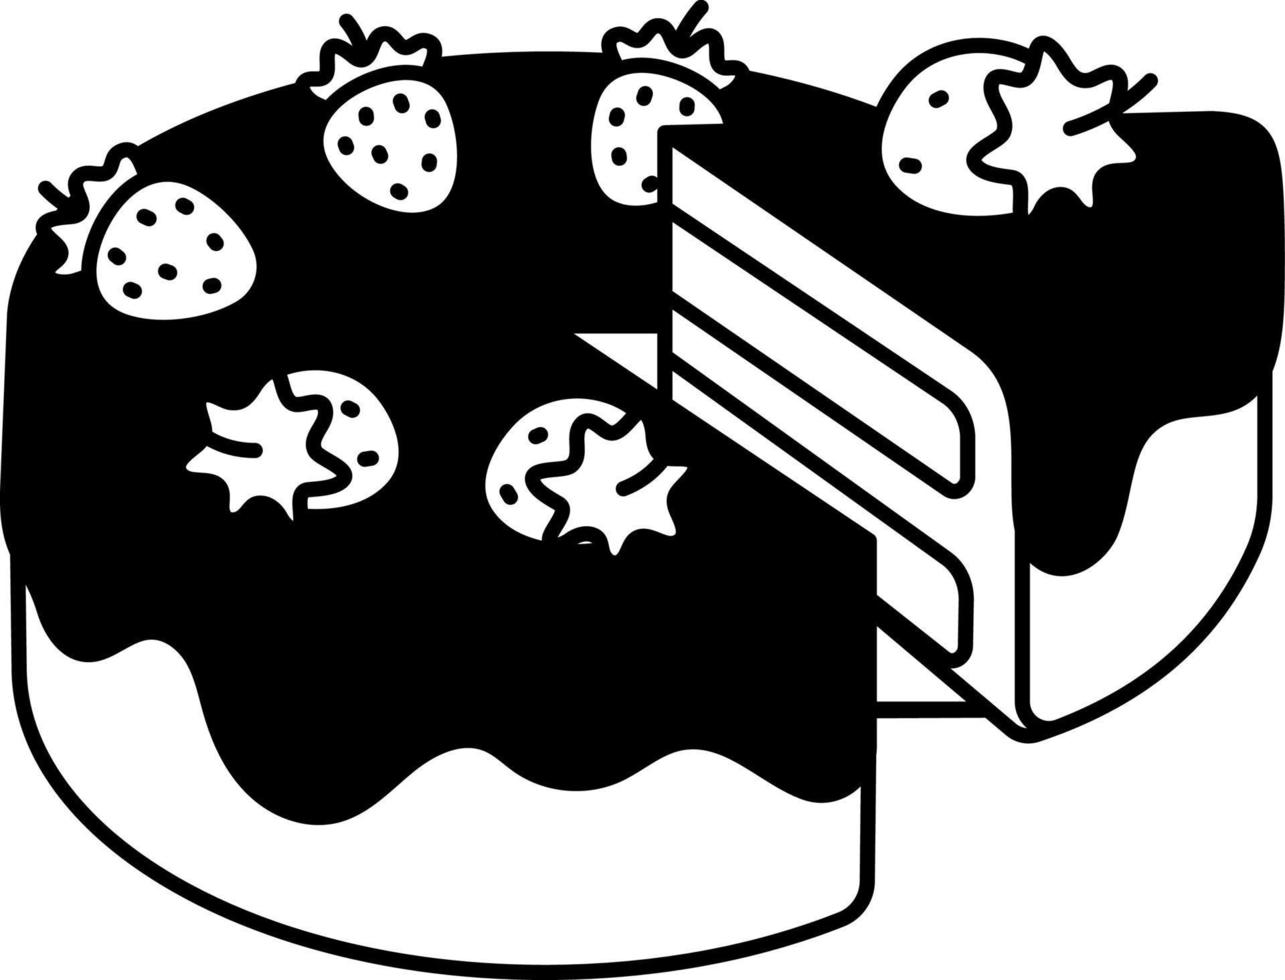 Vanilla Strawberry Cake is being divided Dessert Icon Element illustration Semi-Solid Black and White vector